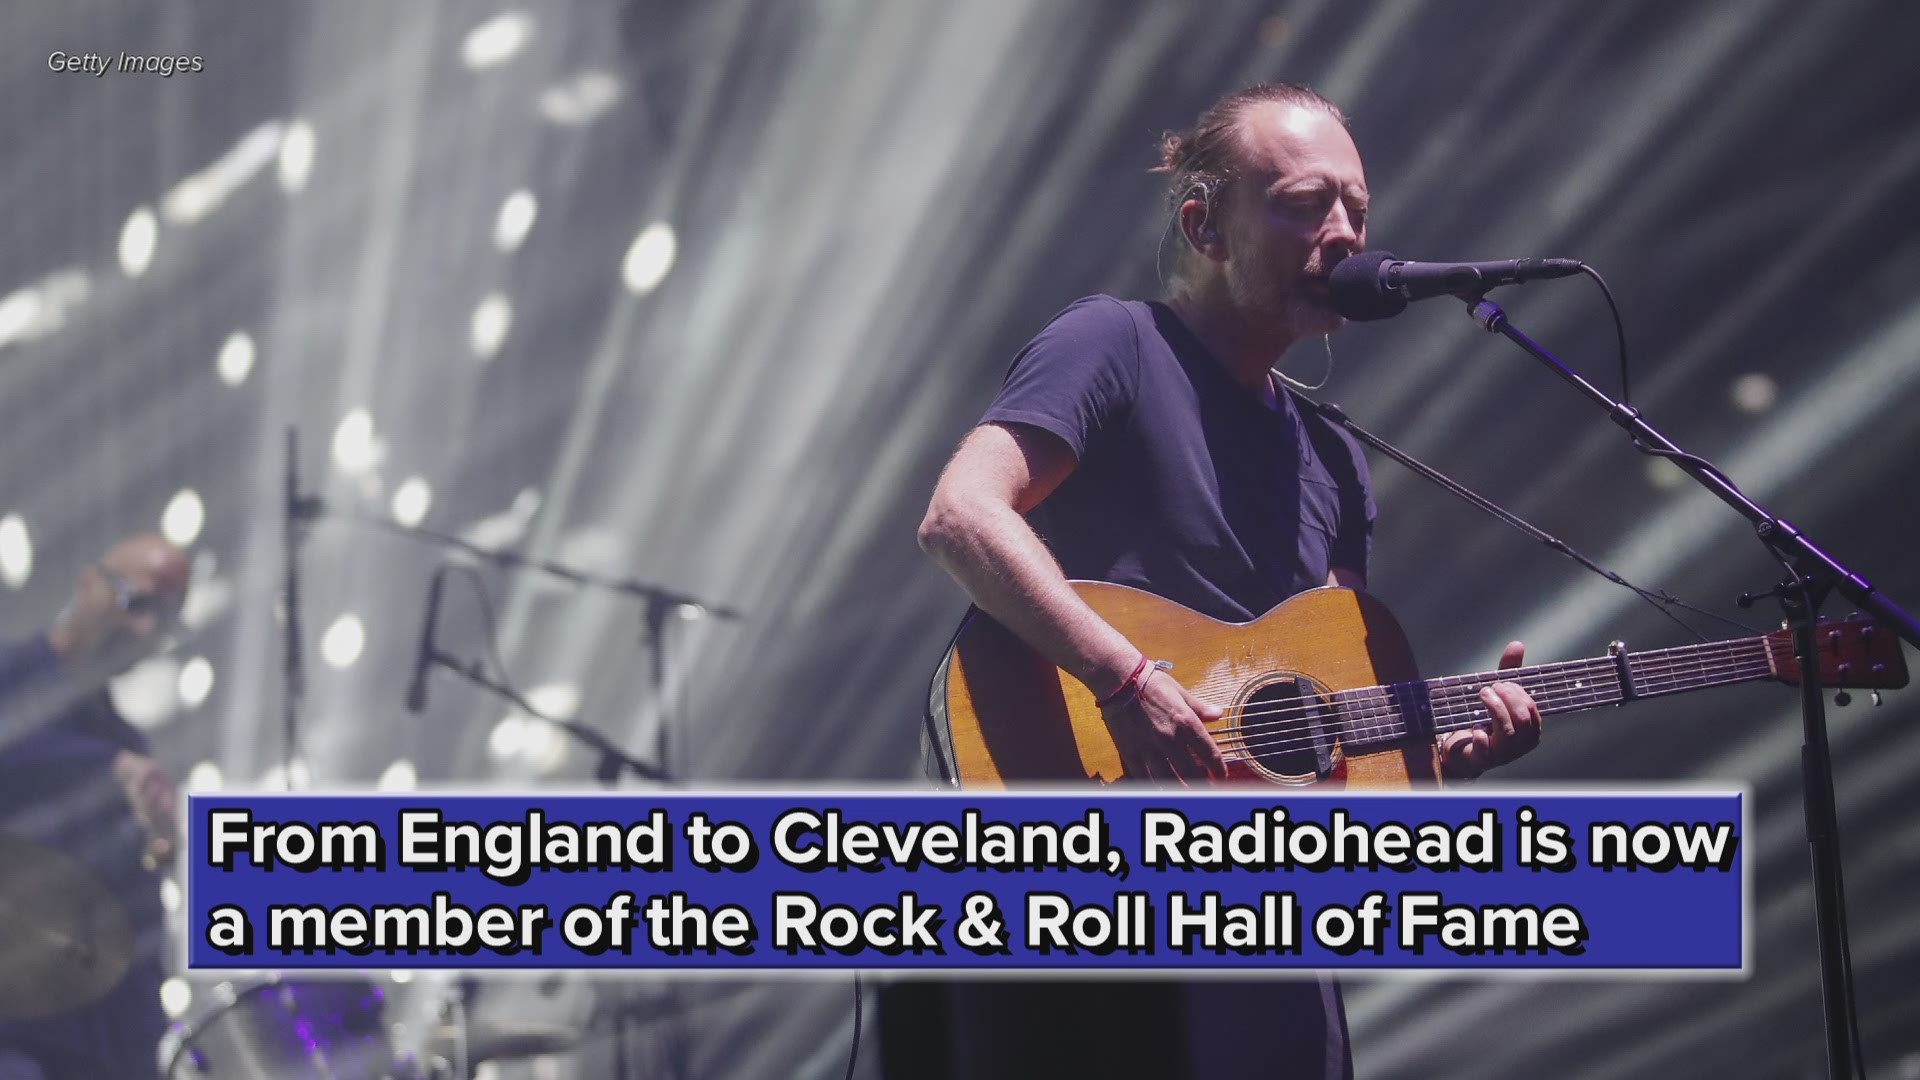 Radiohead inducted into the Hall of Fame. They were nominated last year, but didn’t get inducted